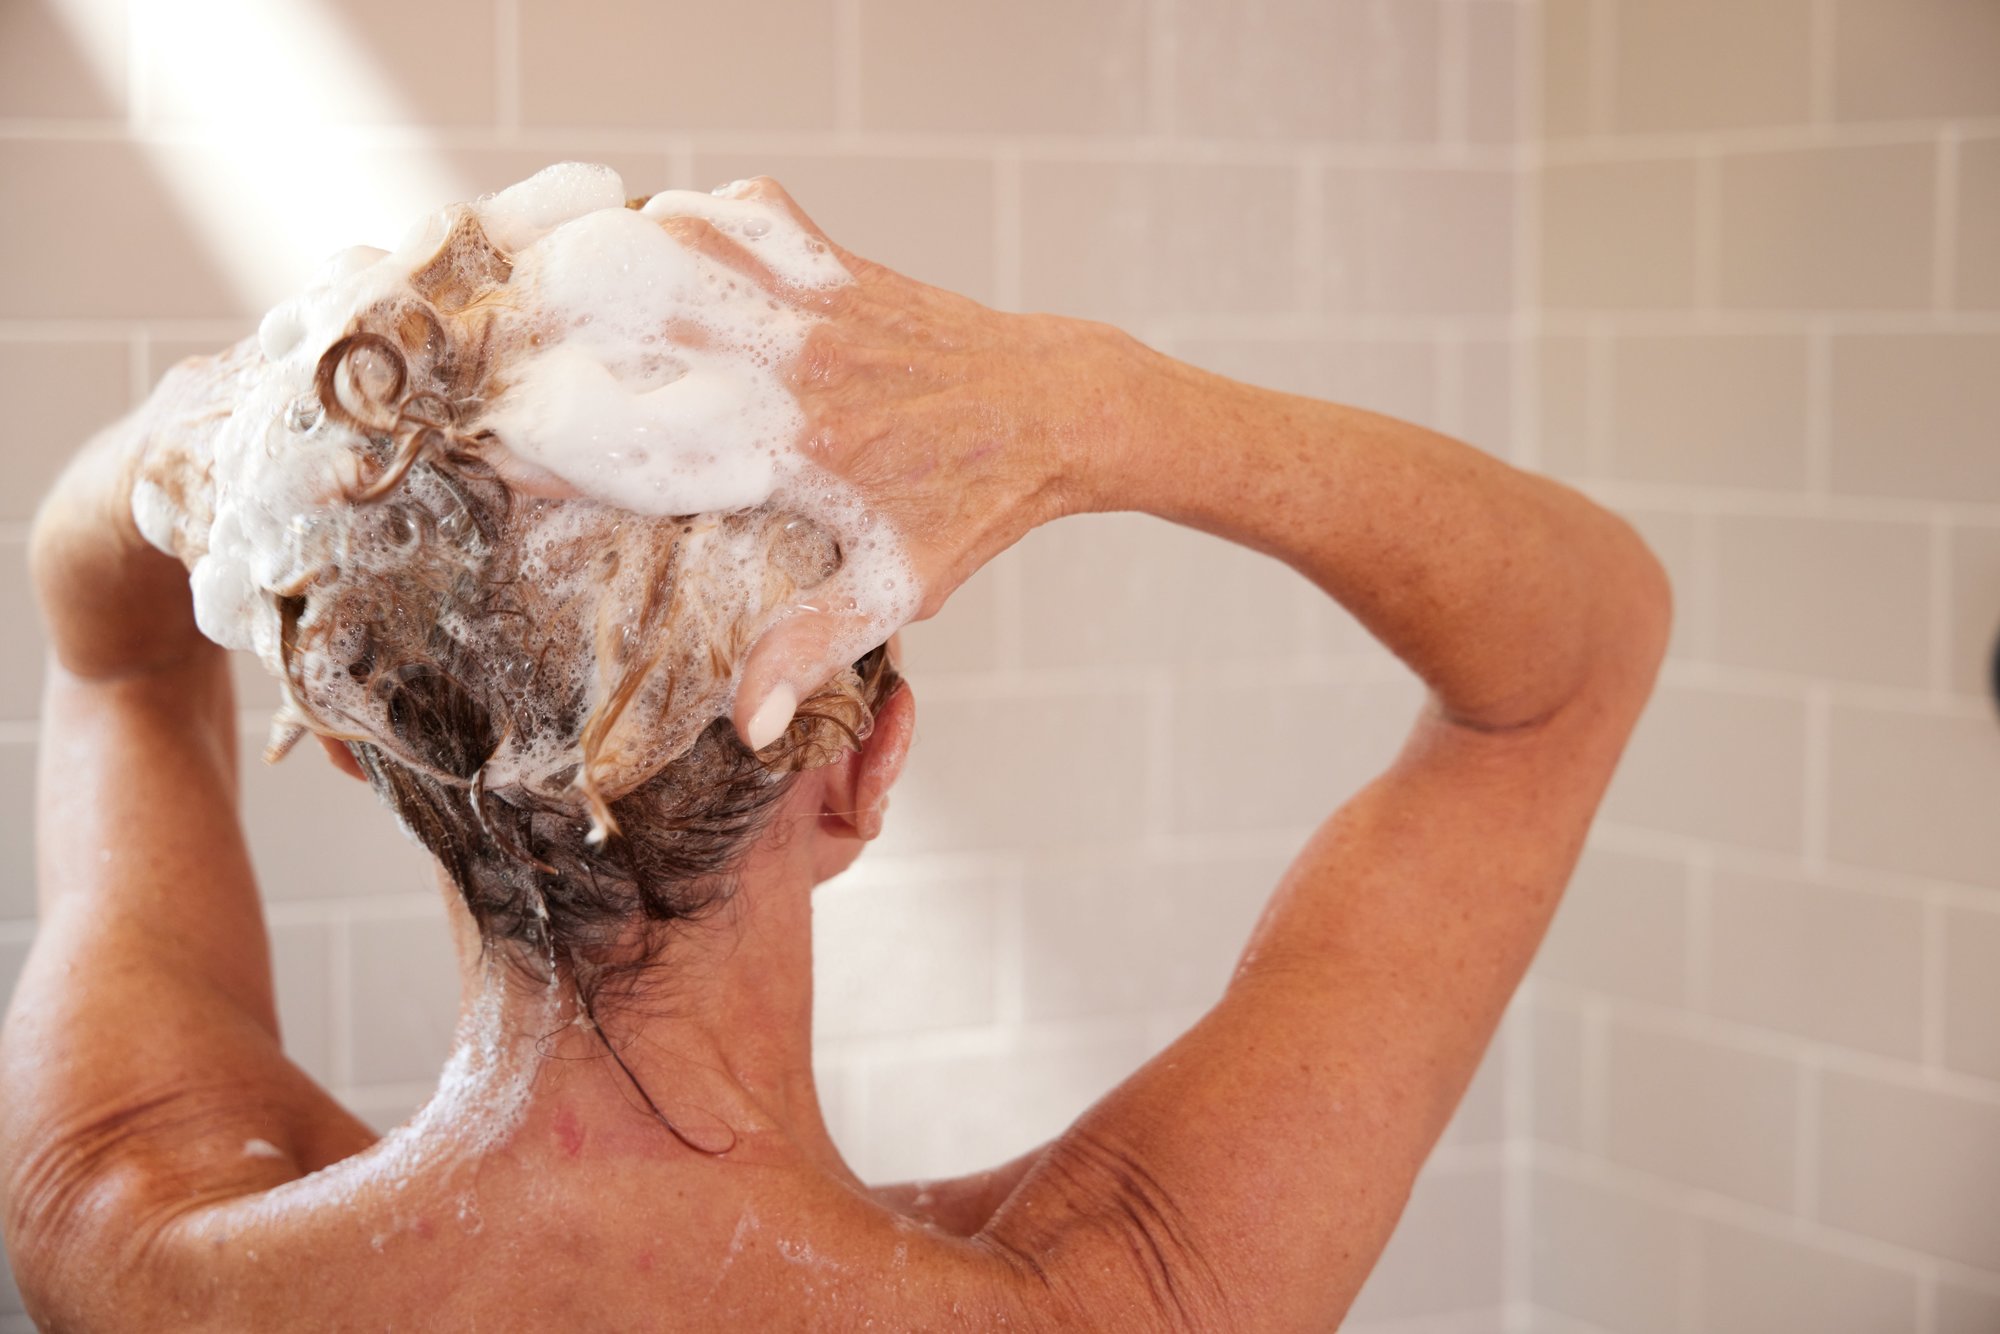 Woman washing hair in the shower